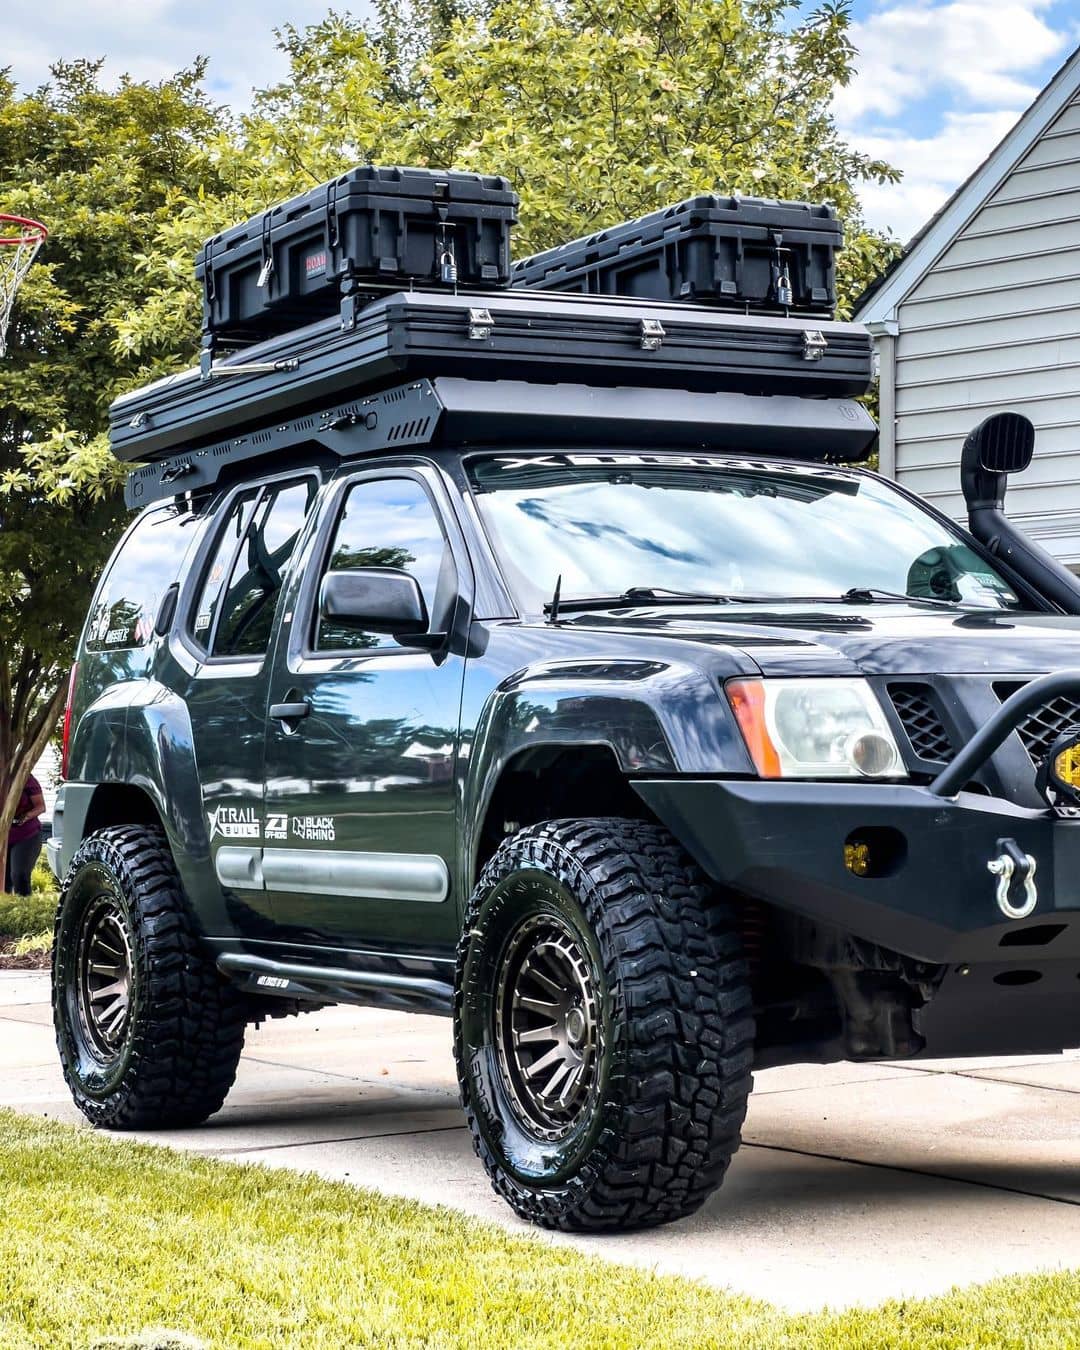 2ng Gen Nissan Xterra Overland build sits on Blackrhino Raid wheels, Mickey Thompson tires Baja Boss M/T 35/12.5/R17 and Boraoffroad 2.5” spacer for the rear